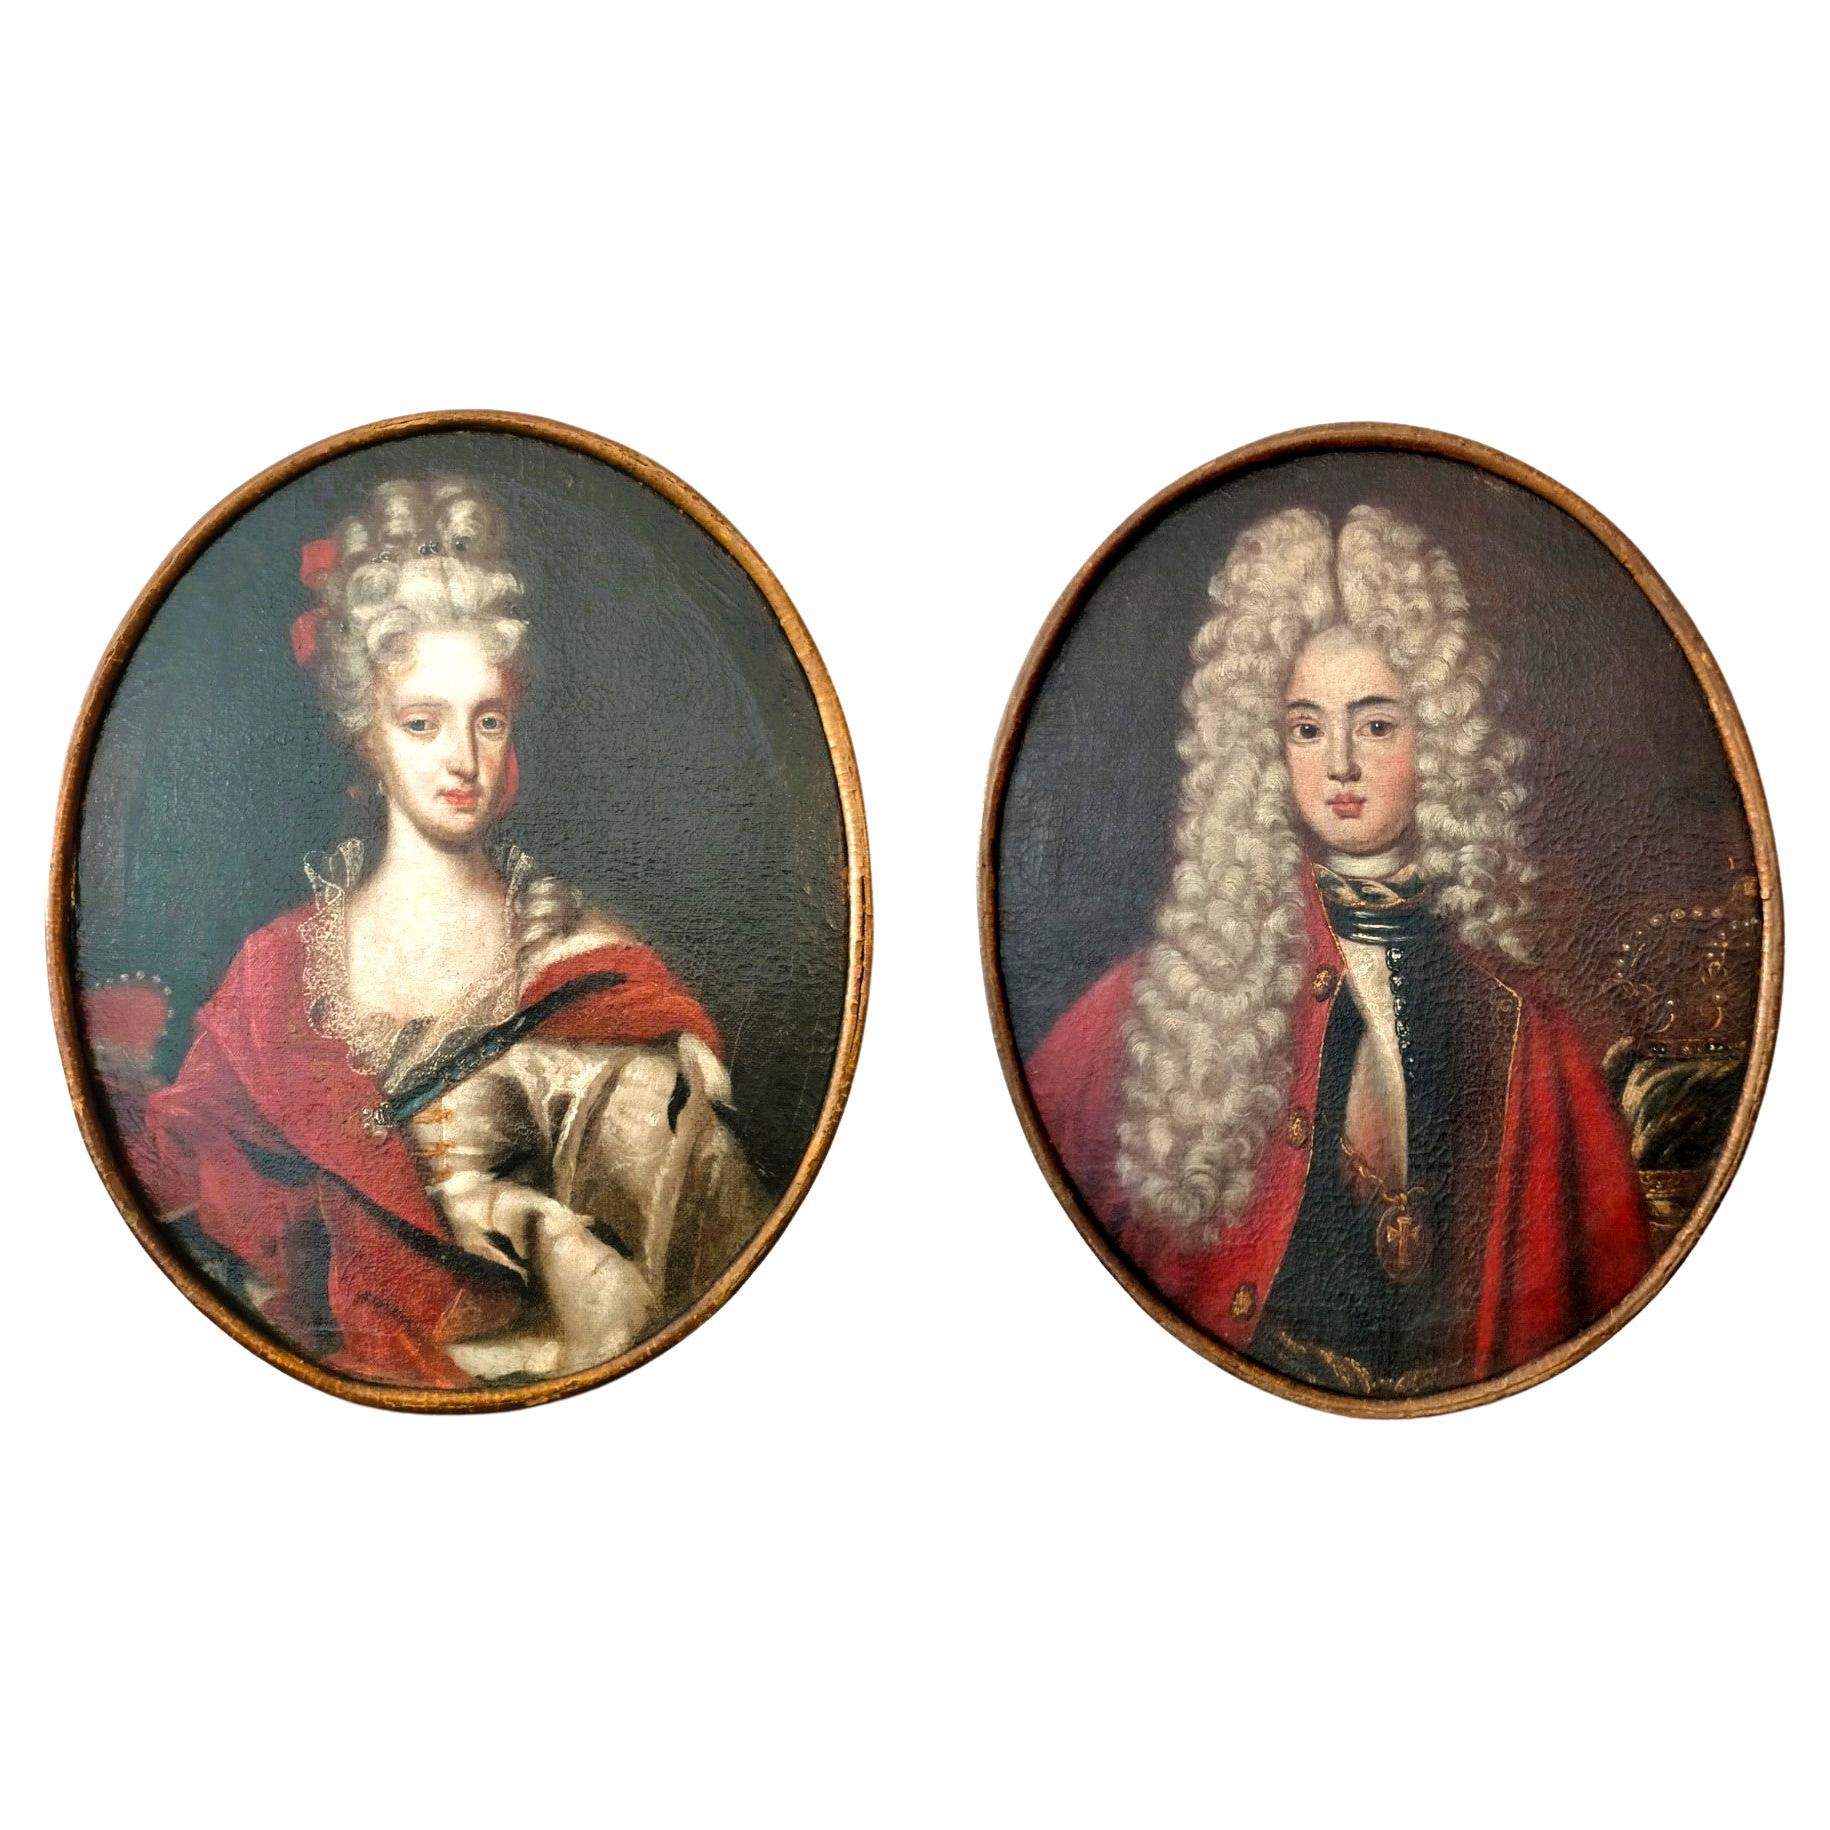 1600s Paintings of French Nobility